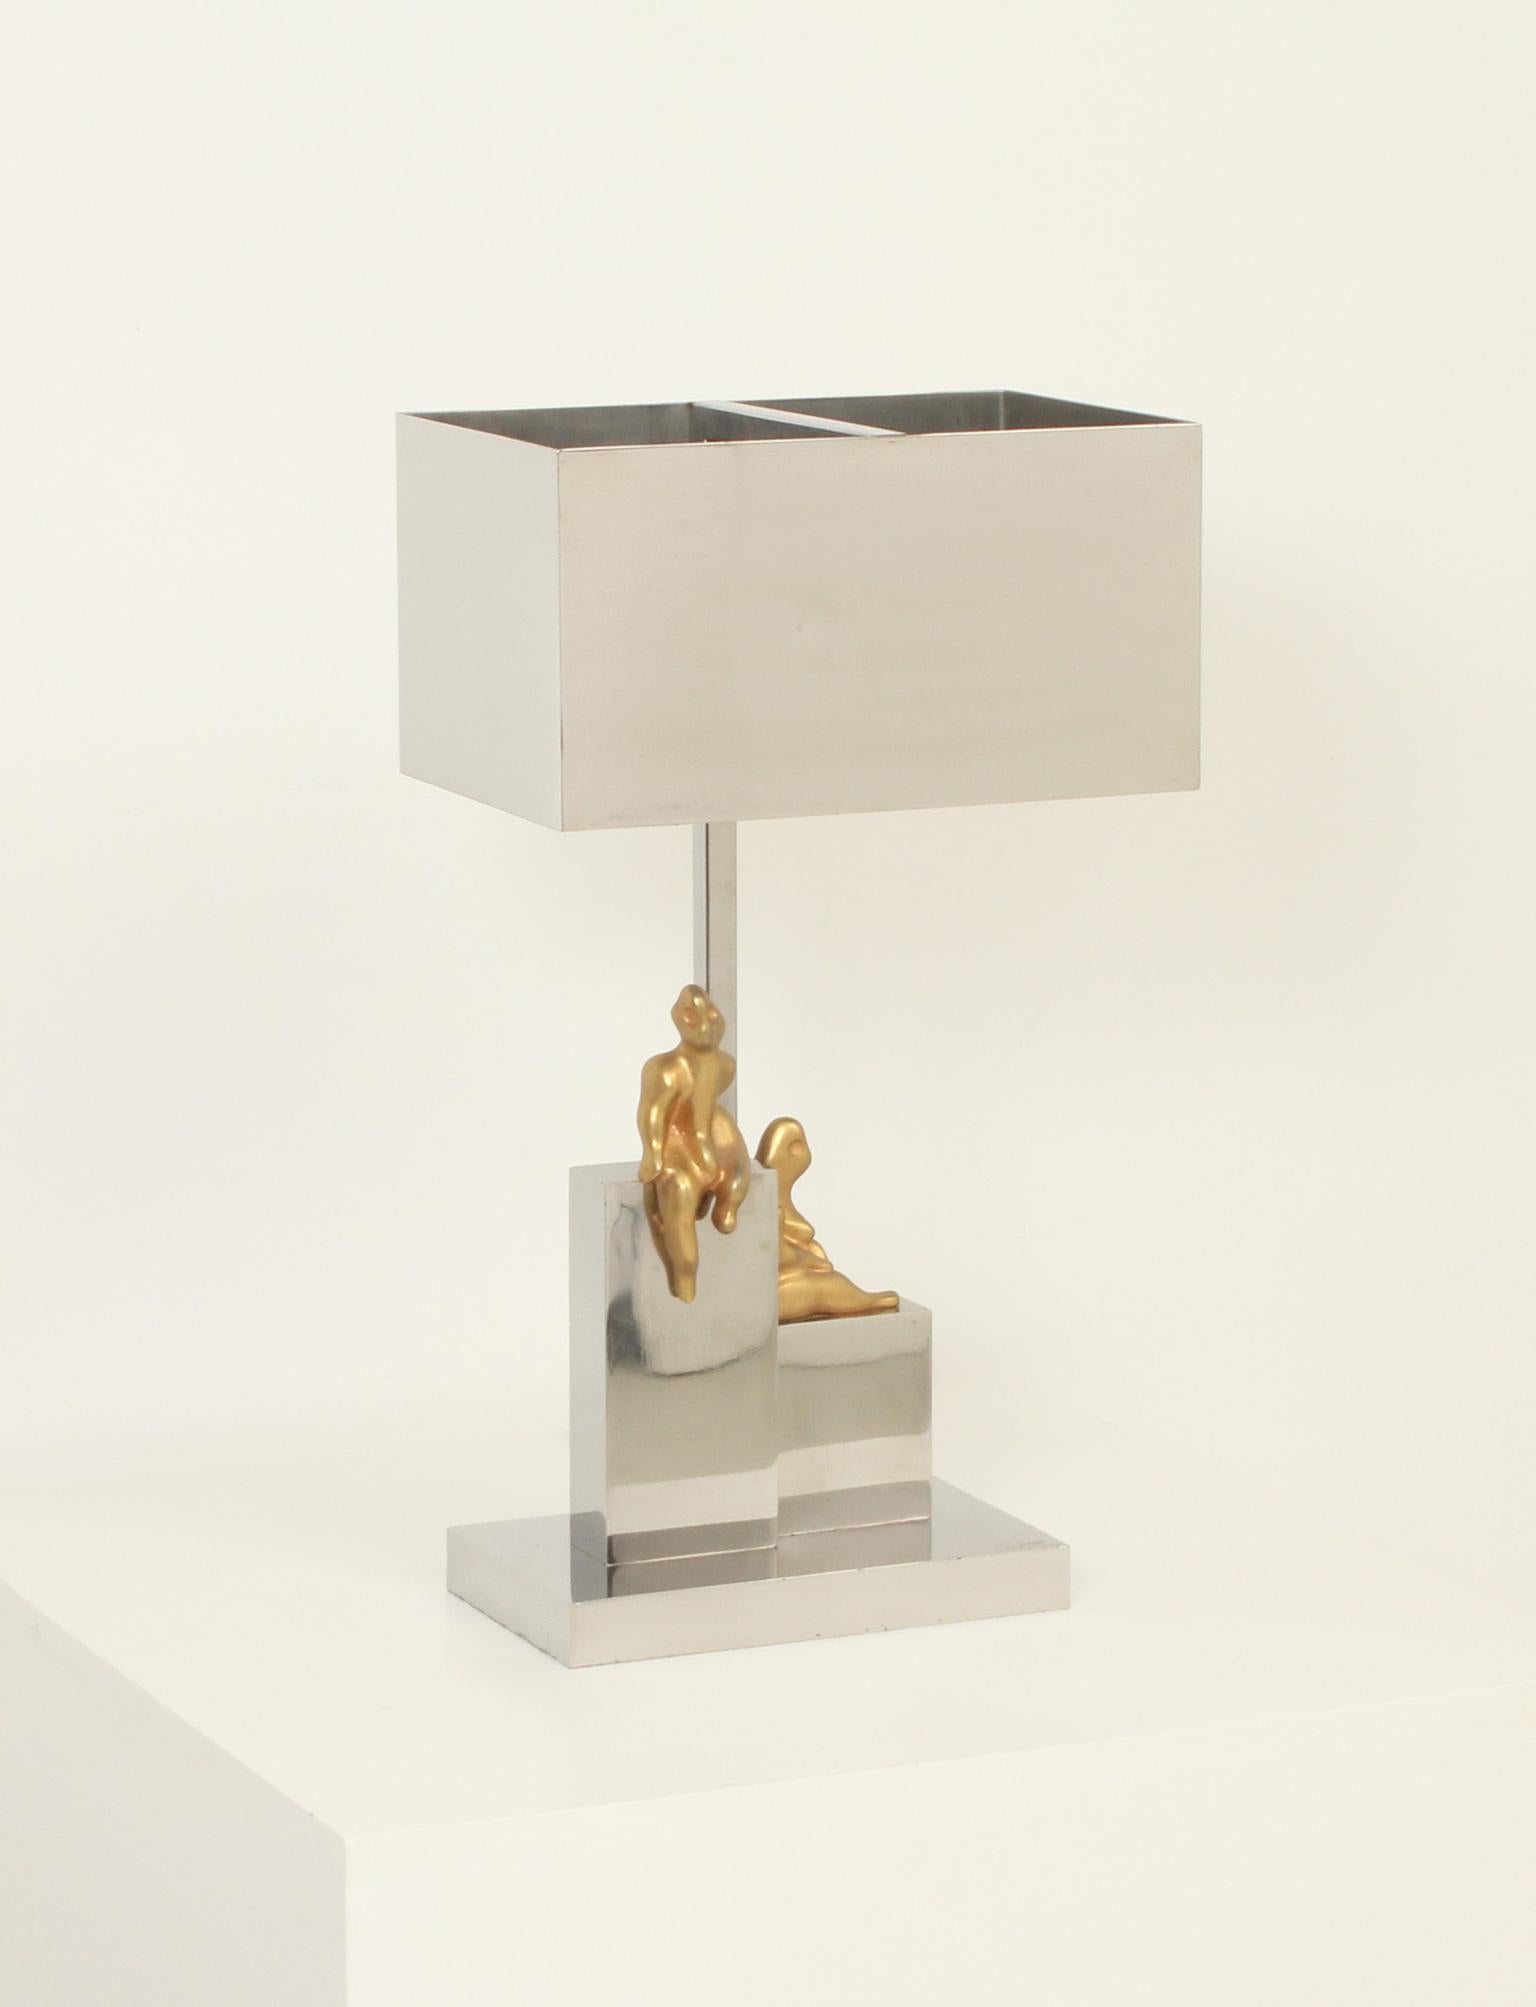 Large table lamp by Spanish sculptor Aurelio Teno for DEC, Madrid, 1970's. Chromed-plated steel and brass in the style of Maria Pergay or Gabriella Crespi. Signed and numbered. 